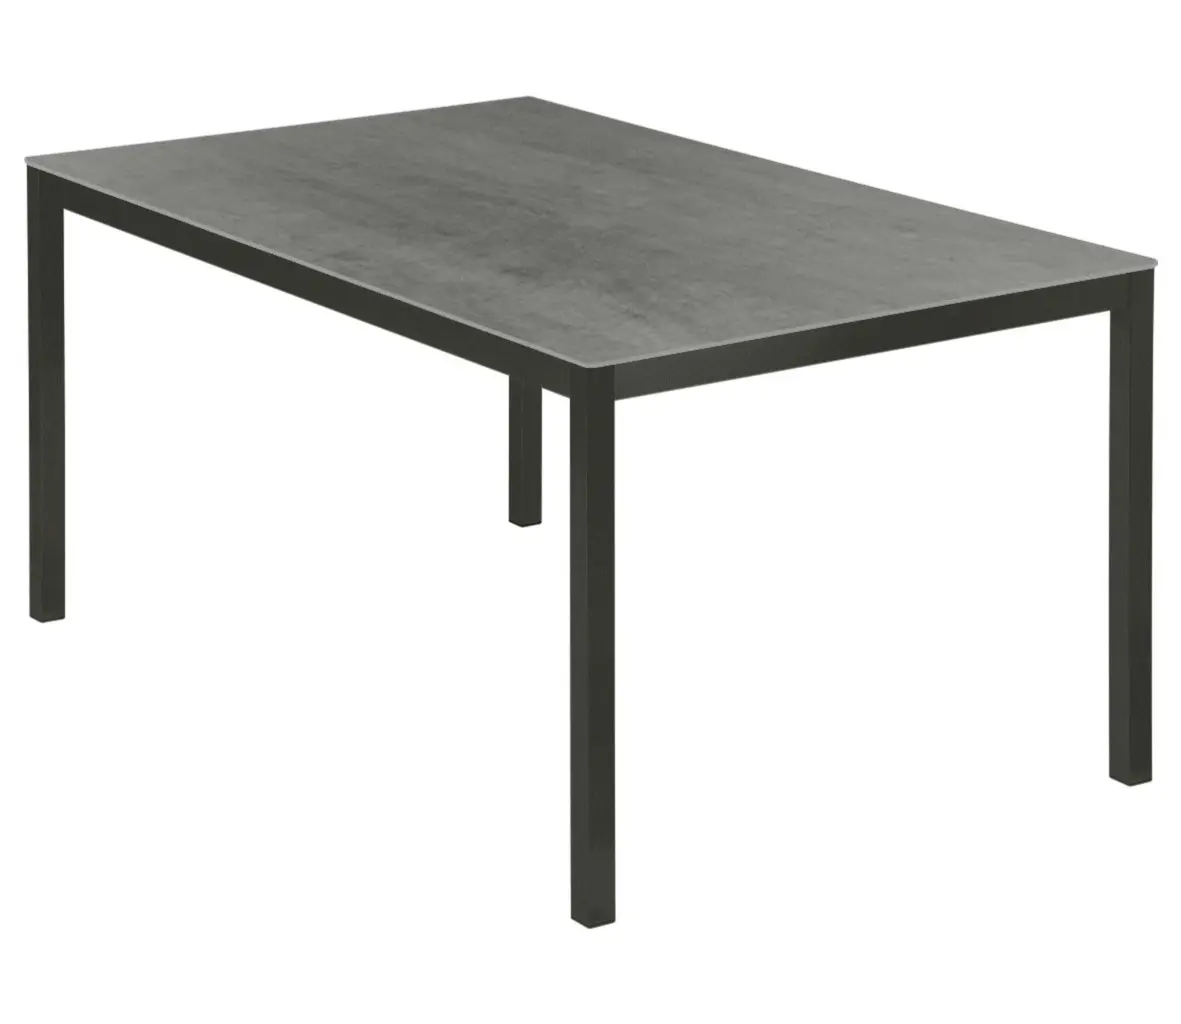 Barlow Tyrie Equinox Powder Coated 150cm Dining Table